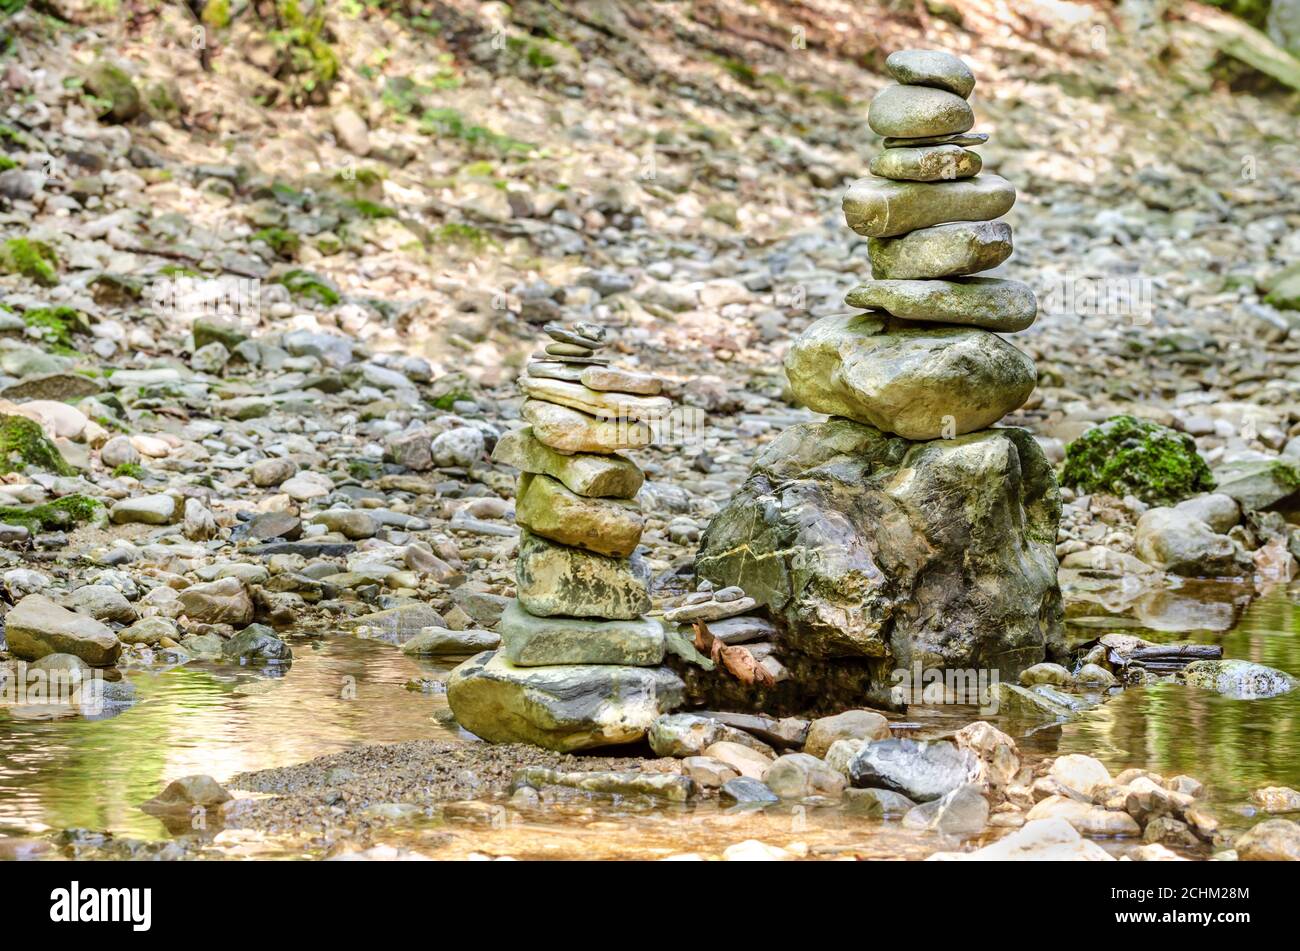 Rock balancing. Two piles of stacked rocks in a riverbed. Rocks laid flat upon each other to great height. Balanced rocks at the creek. Stock Photo